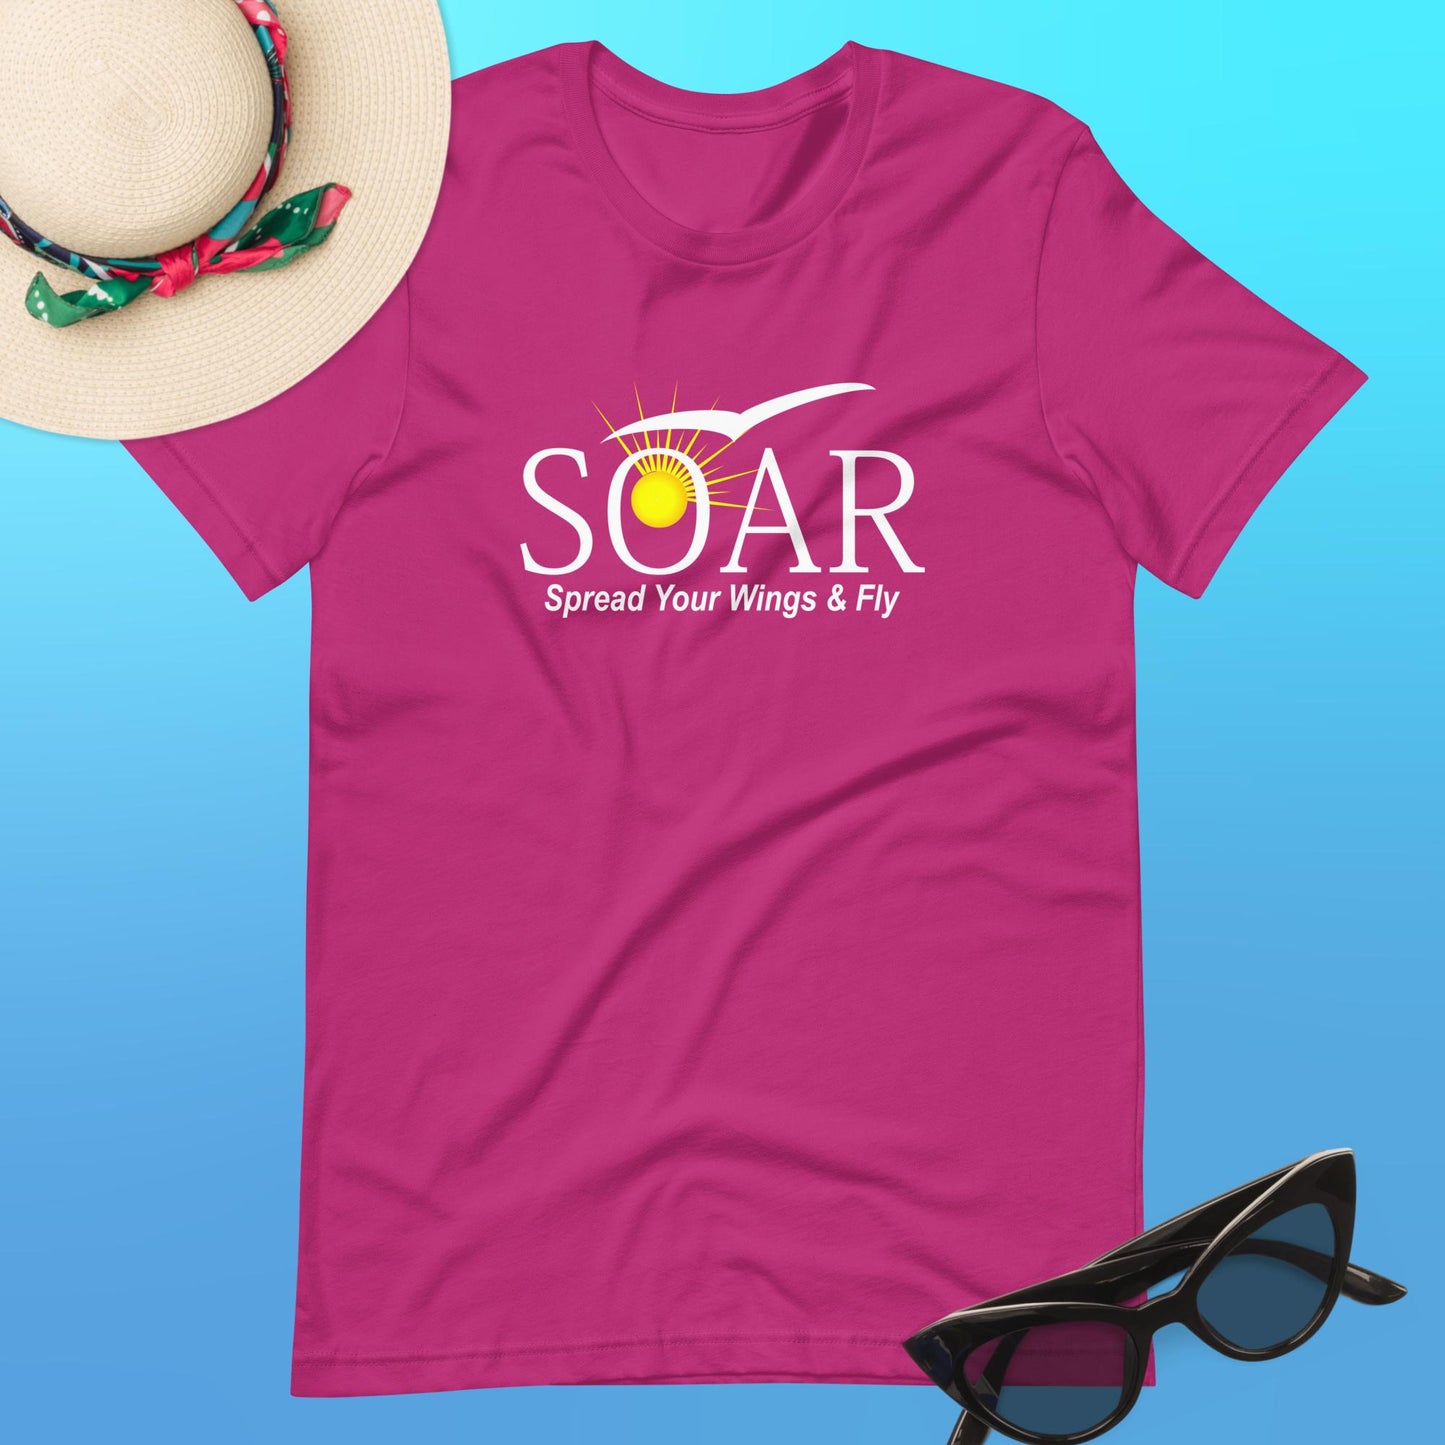 "Berry Red T-Shirt with 'SOAR' Graphic: Sun and Seagull Design Encouraging Flight. 'Spread your wings & fly' - Available at PuraFashions.com. Flat-lay image showcasing the front design."